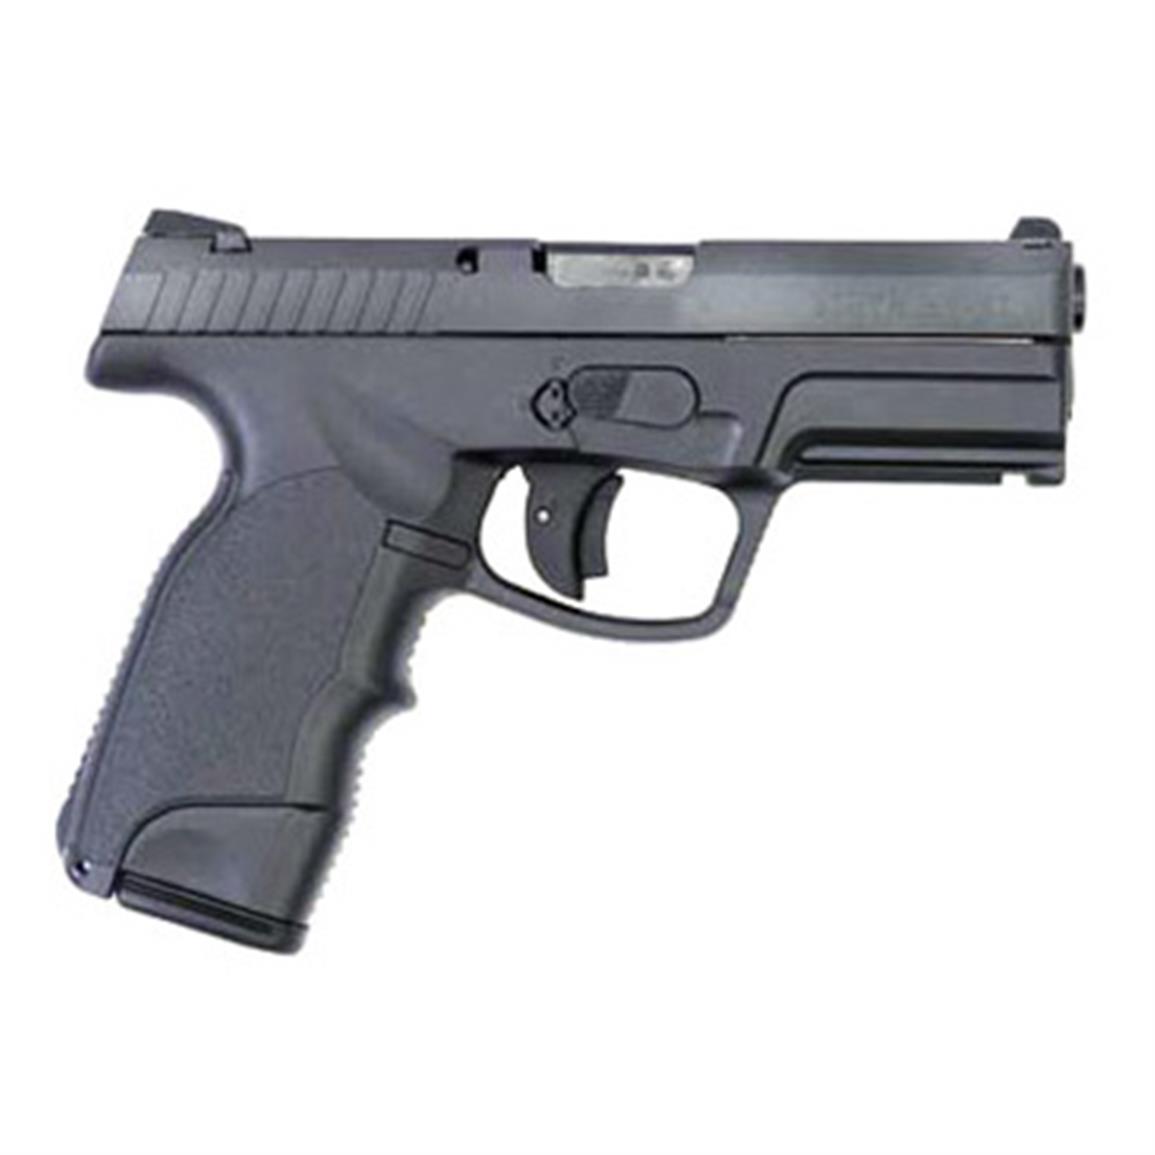 Steyr Arms L9-A1 Long Slide, Semi-automatic, 9mm, 4.53" Barrel, 17+1 Rounds